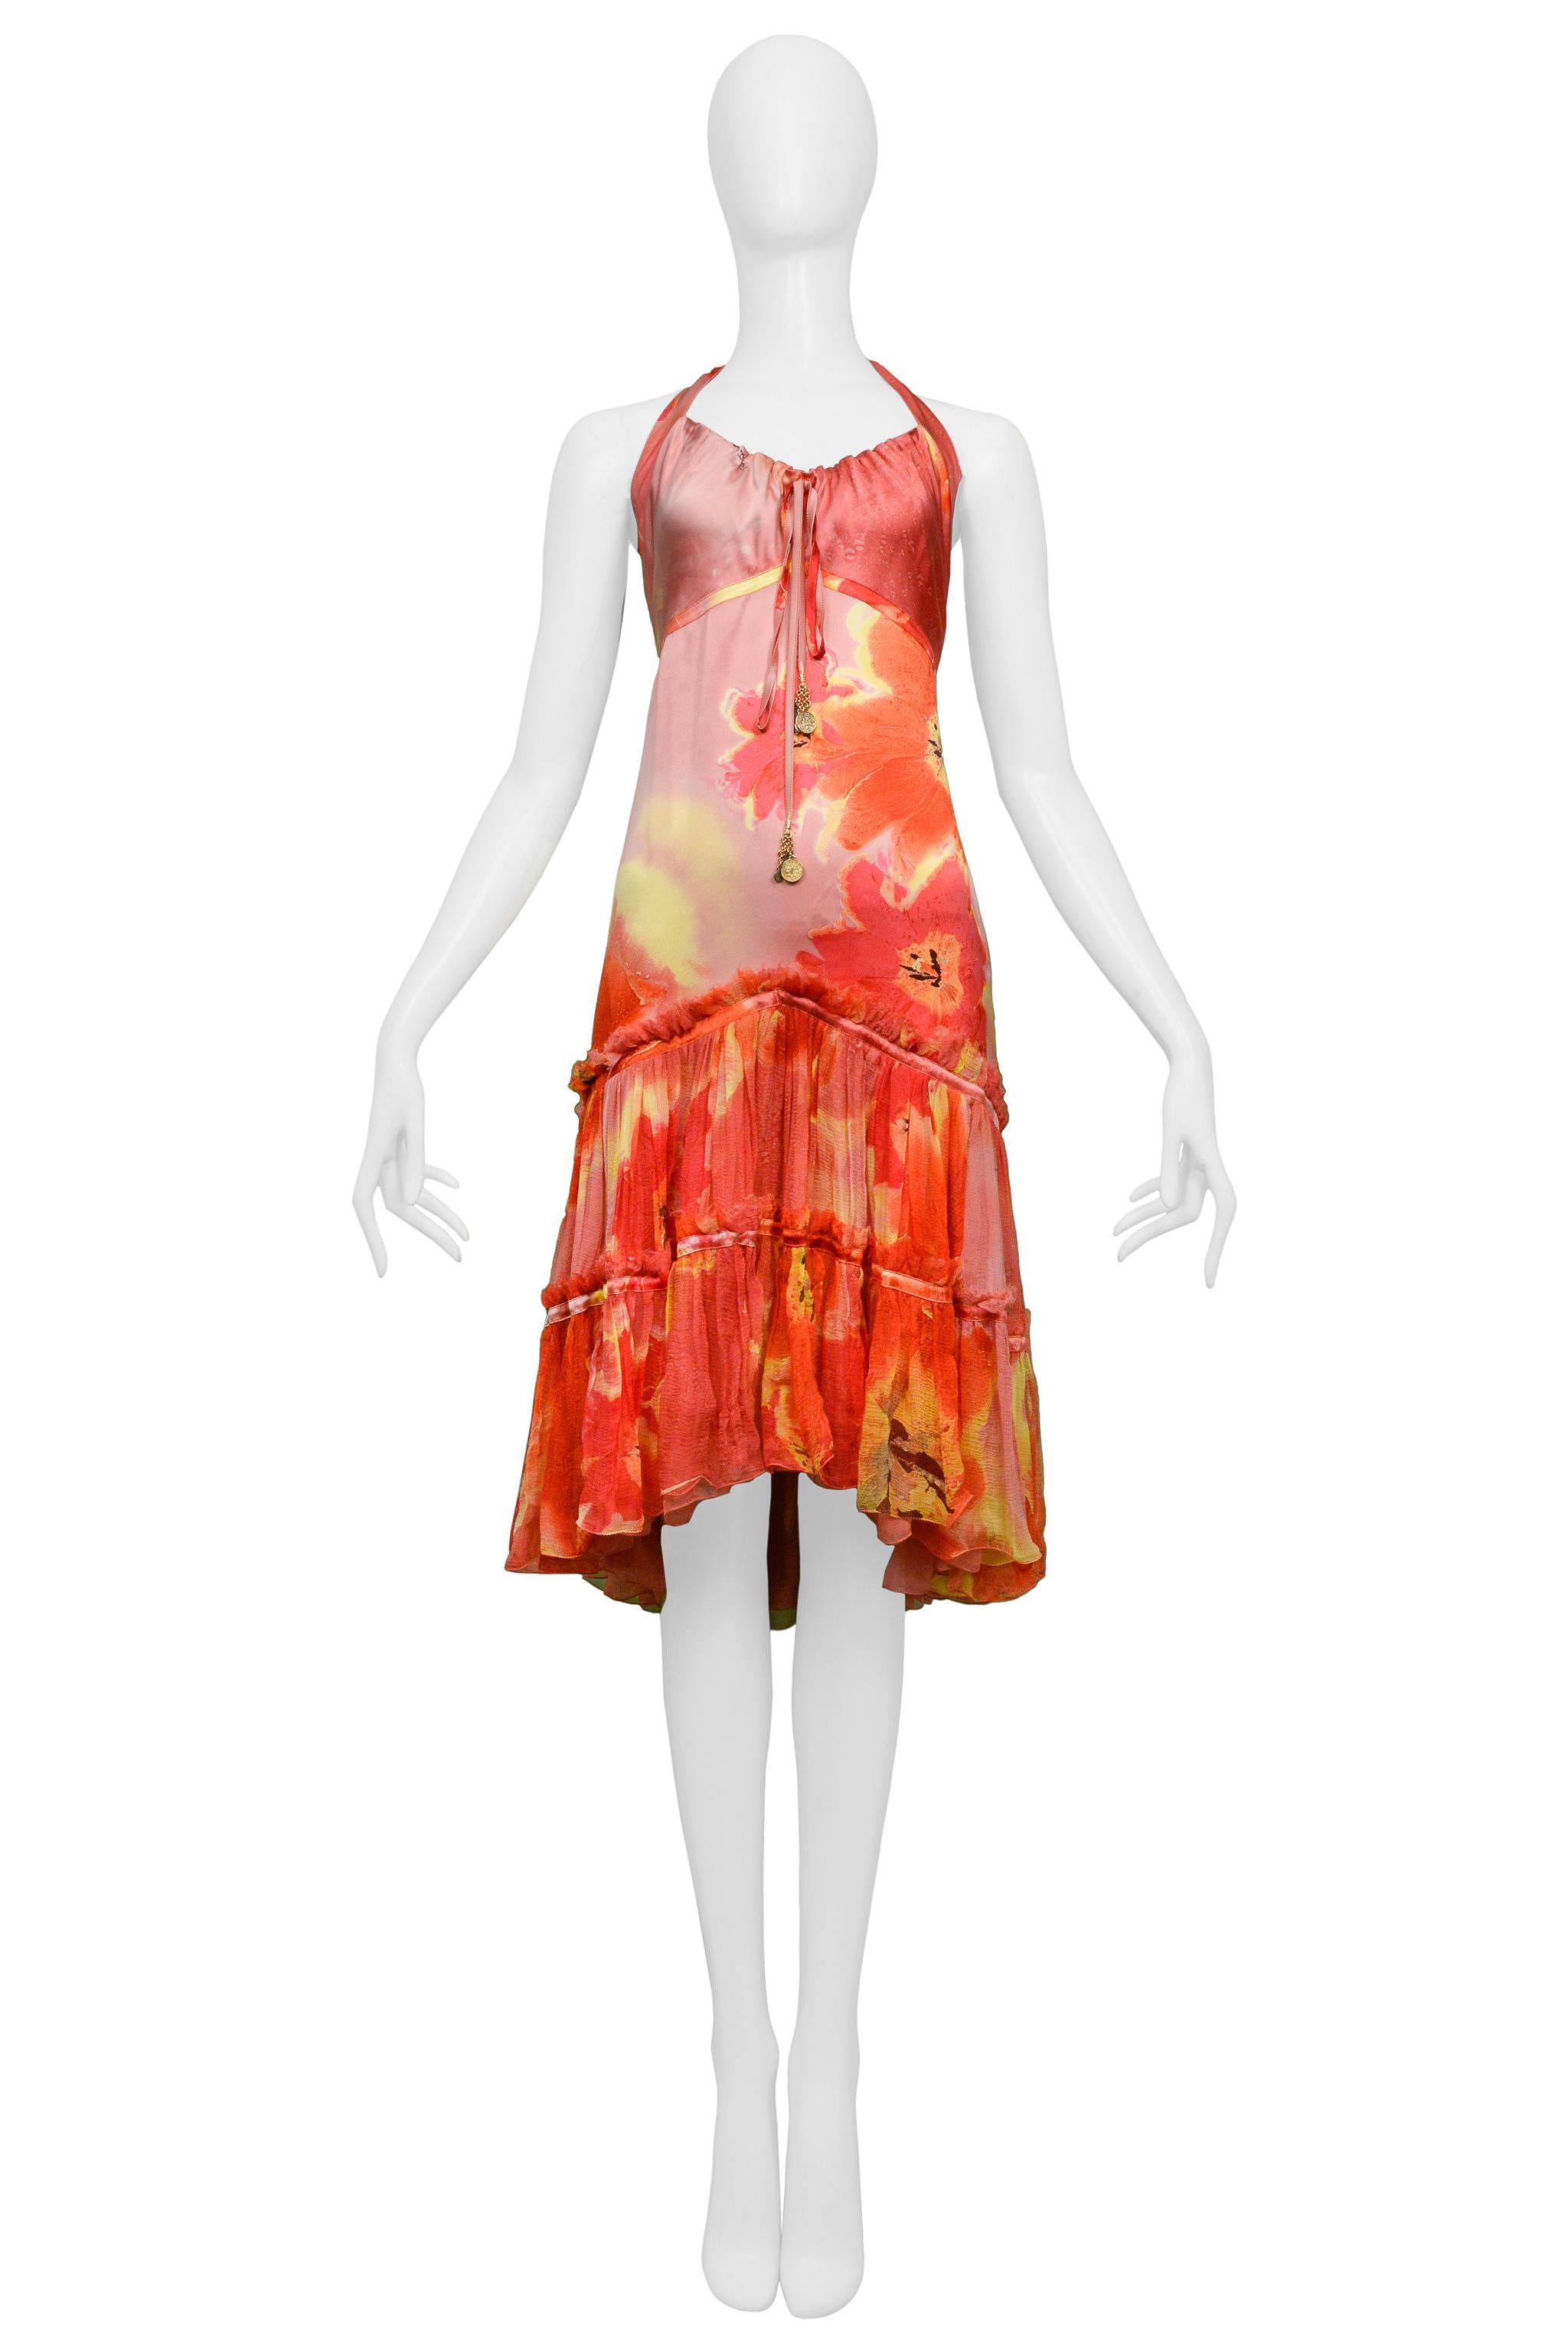 Resurrection Vintage is excited to present a vintage Roberto Cavalli satin slip dress featuring a halter top with ties and gold hardware, an abstract floral pink, yellow, red, and orange print, and ruffles. 

Roberto Cavalli
Size: XS/Small Fits like